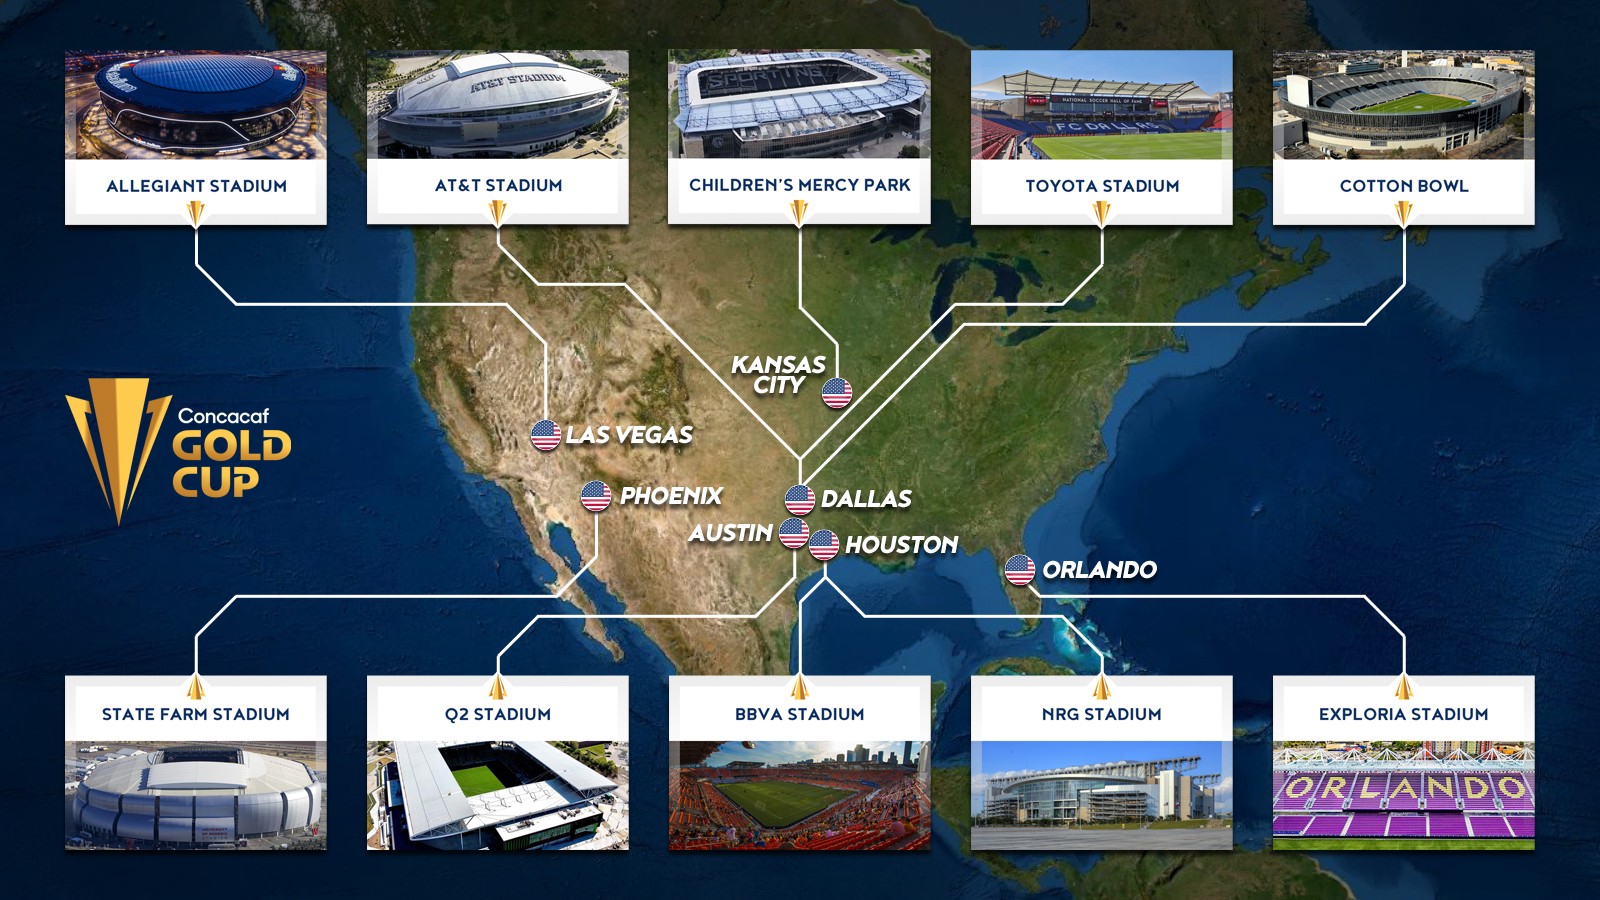 CONCACAF Gold Cup 2021 host stadiums